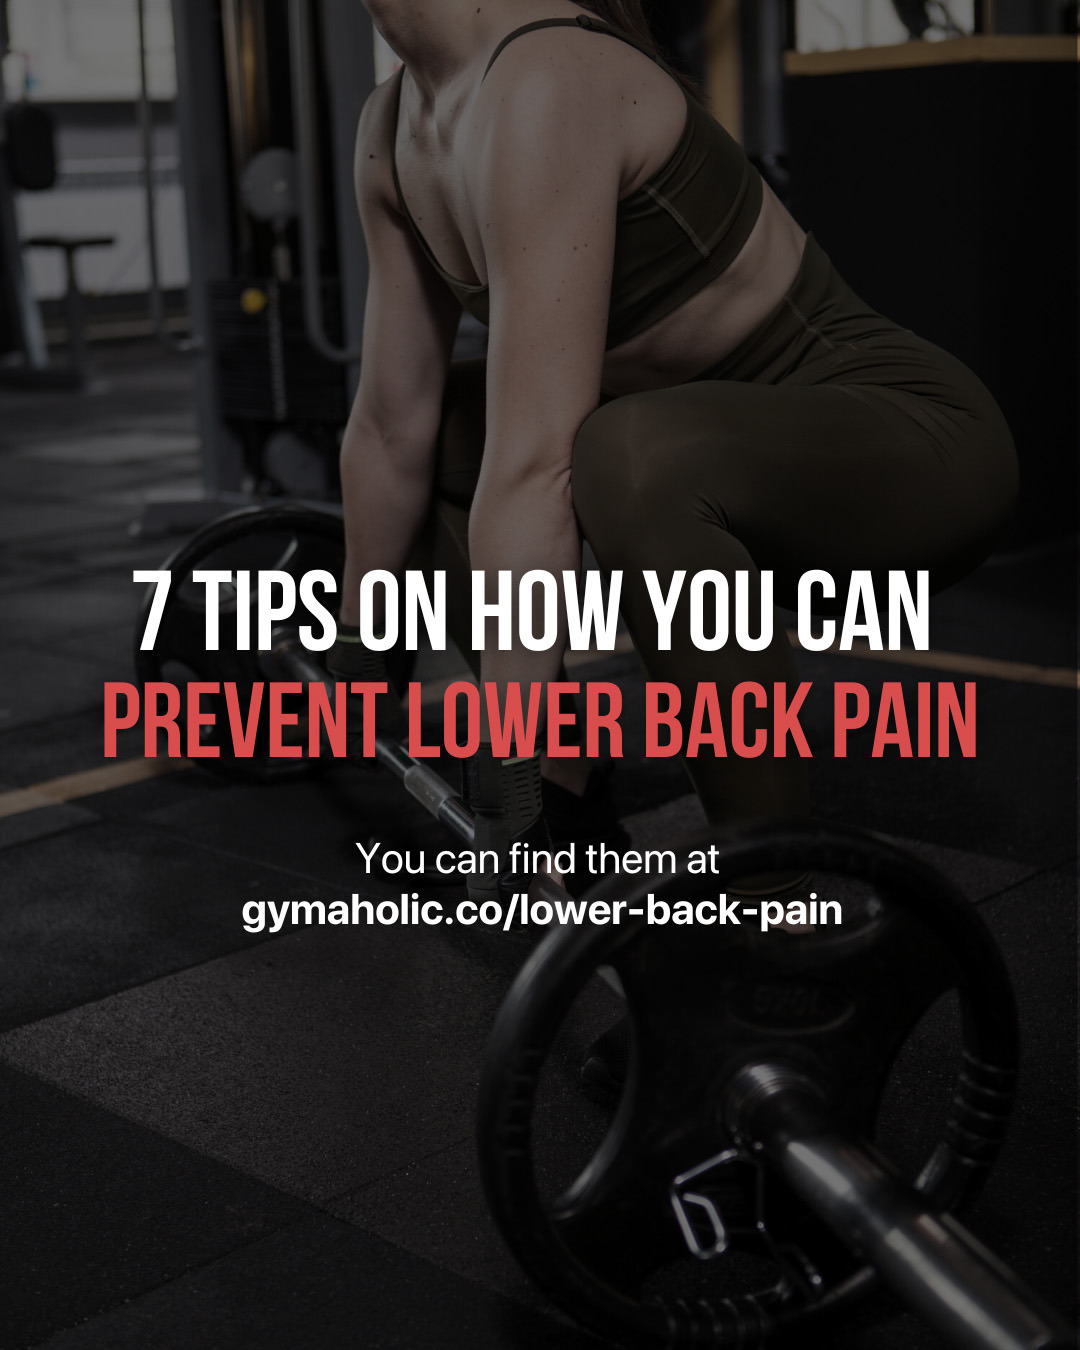 7 tips on how you can prevent lower back pain